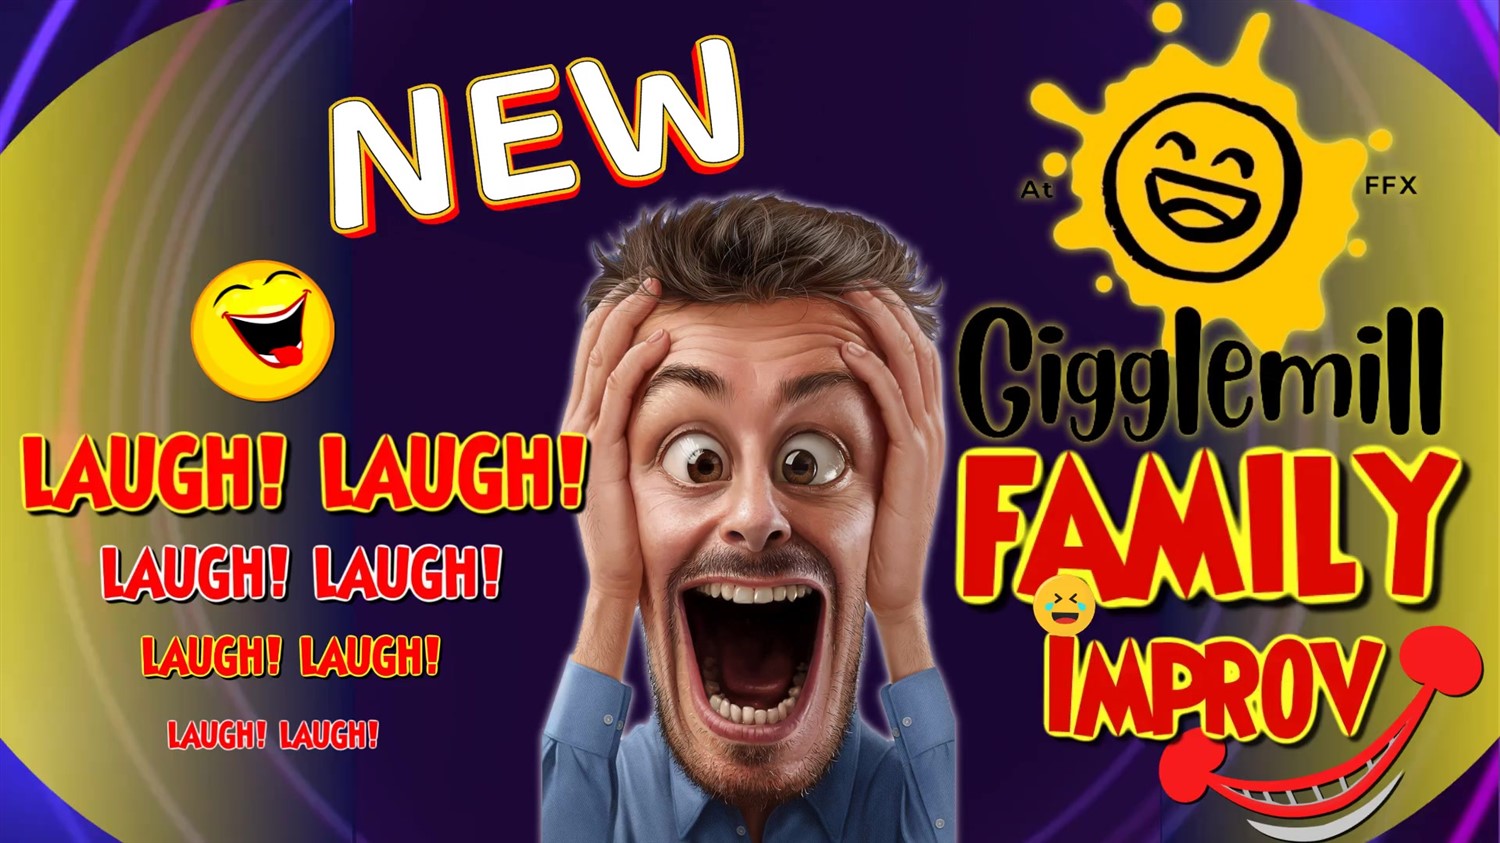 GIGGLEMILL - FAMILY IMPROV SHOW New Xperience for all ages - join in the fun! on mars 25, 19:00@FFX Theatre - Choisissez un siège,Achetez des billets et obtenez des informations surFamily Fun Xperience tickets.ffxshow.org